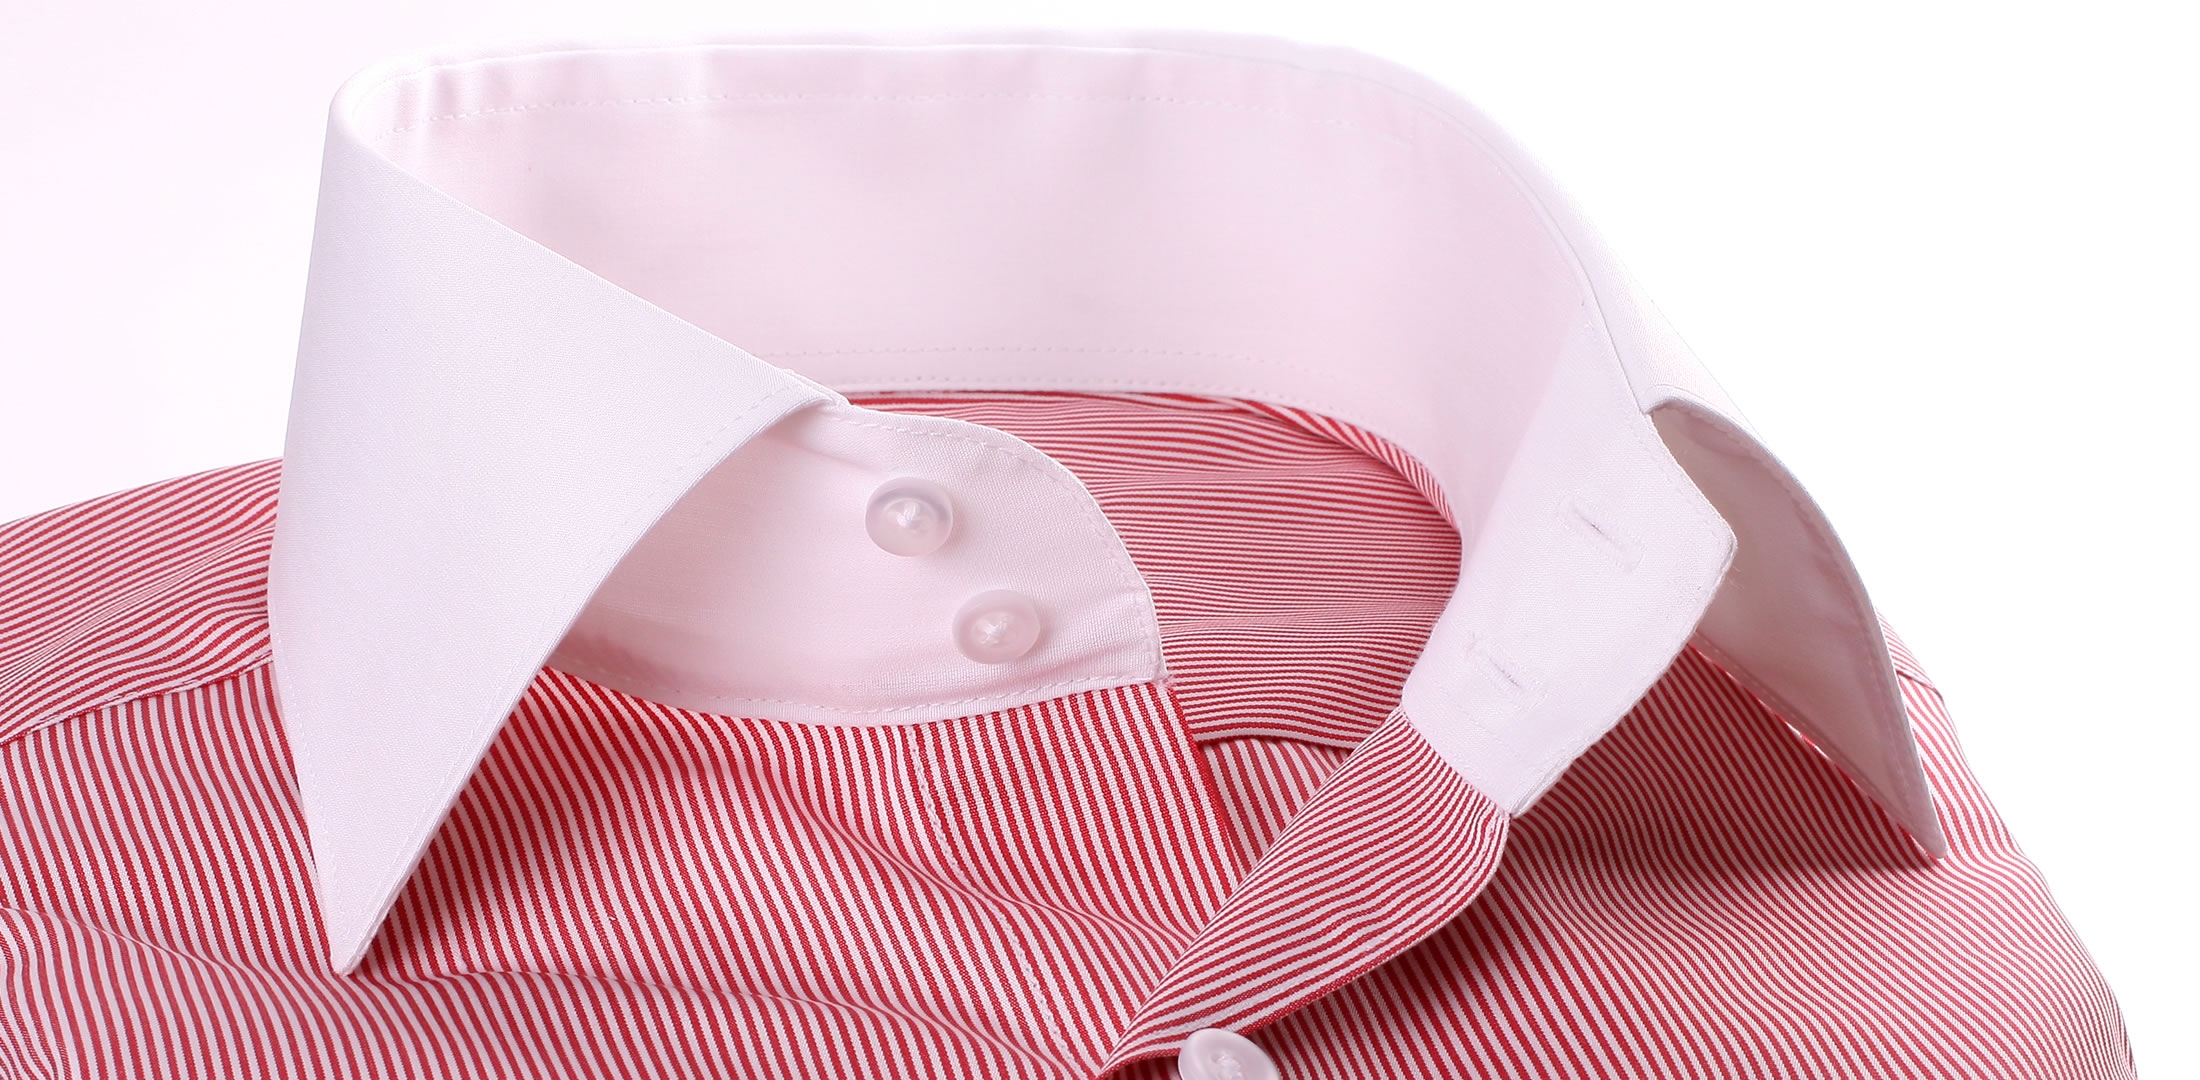 Thin red and white stripes shirt with white collar and cuffs